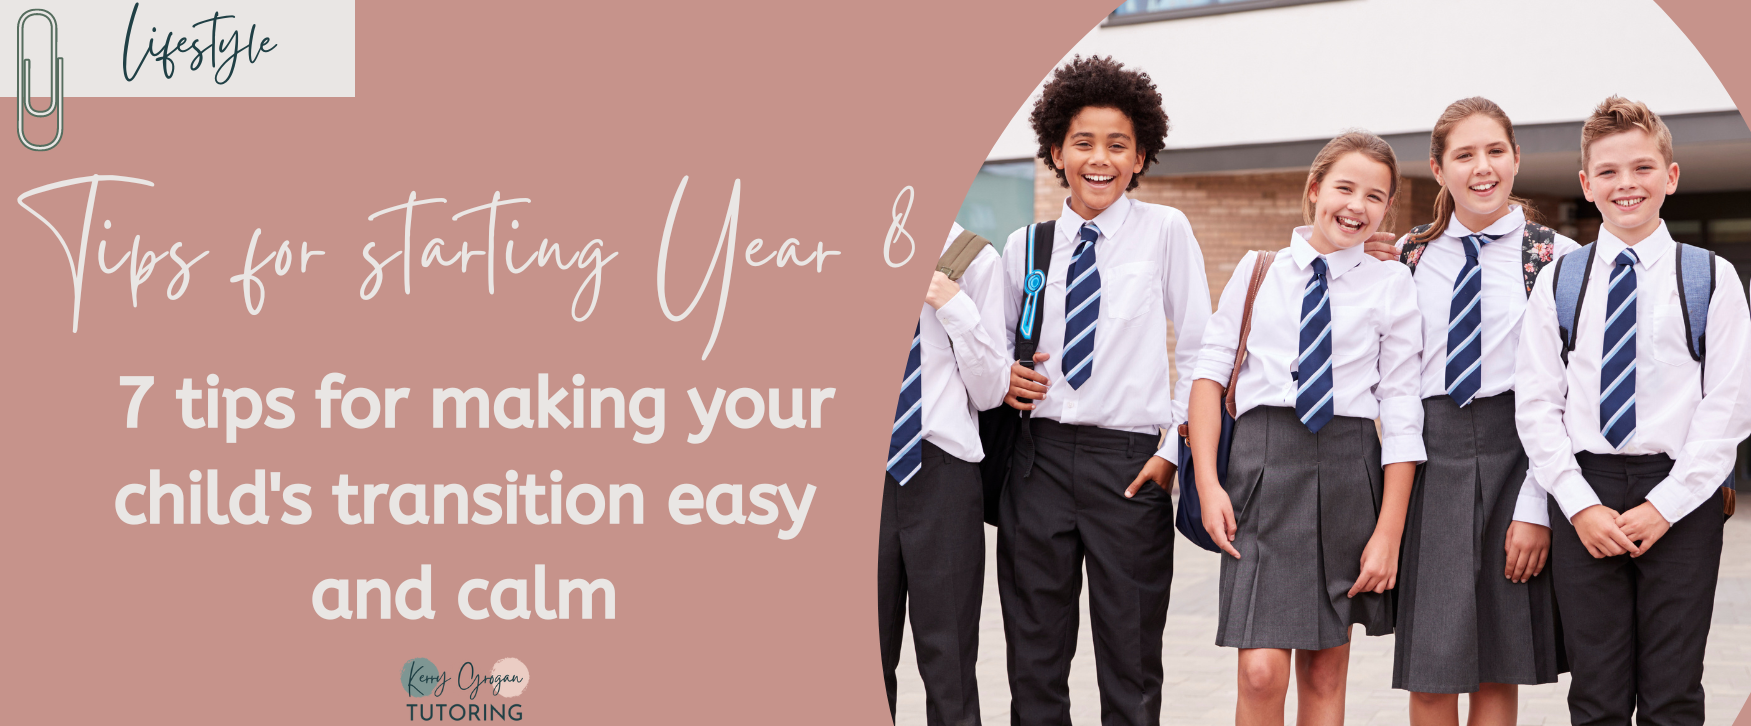 Tips for starting Year 8: 7 tips for making your child's transition easy and calm